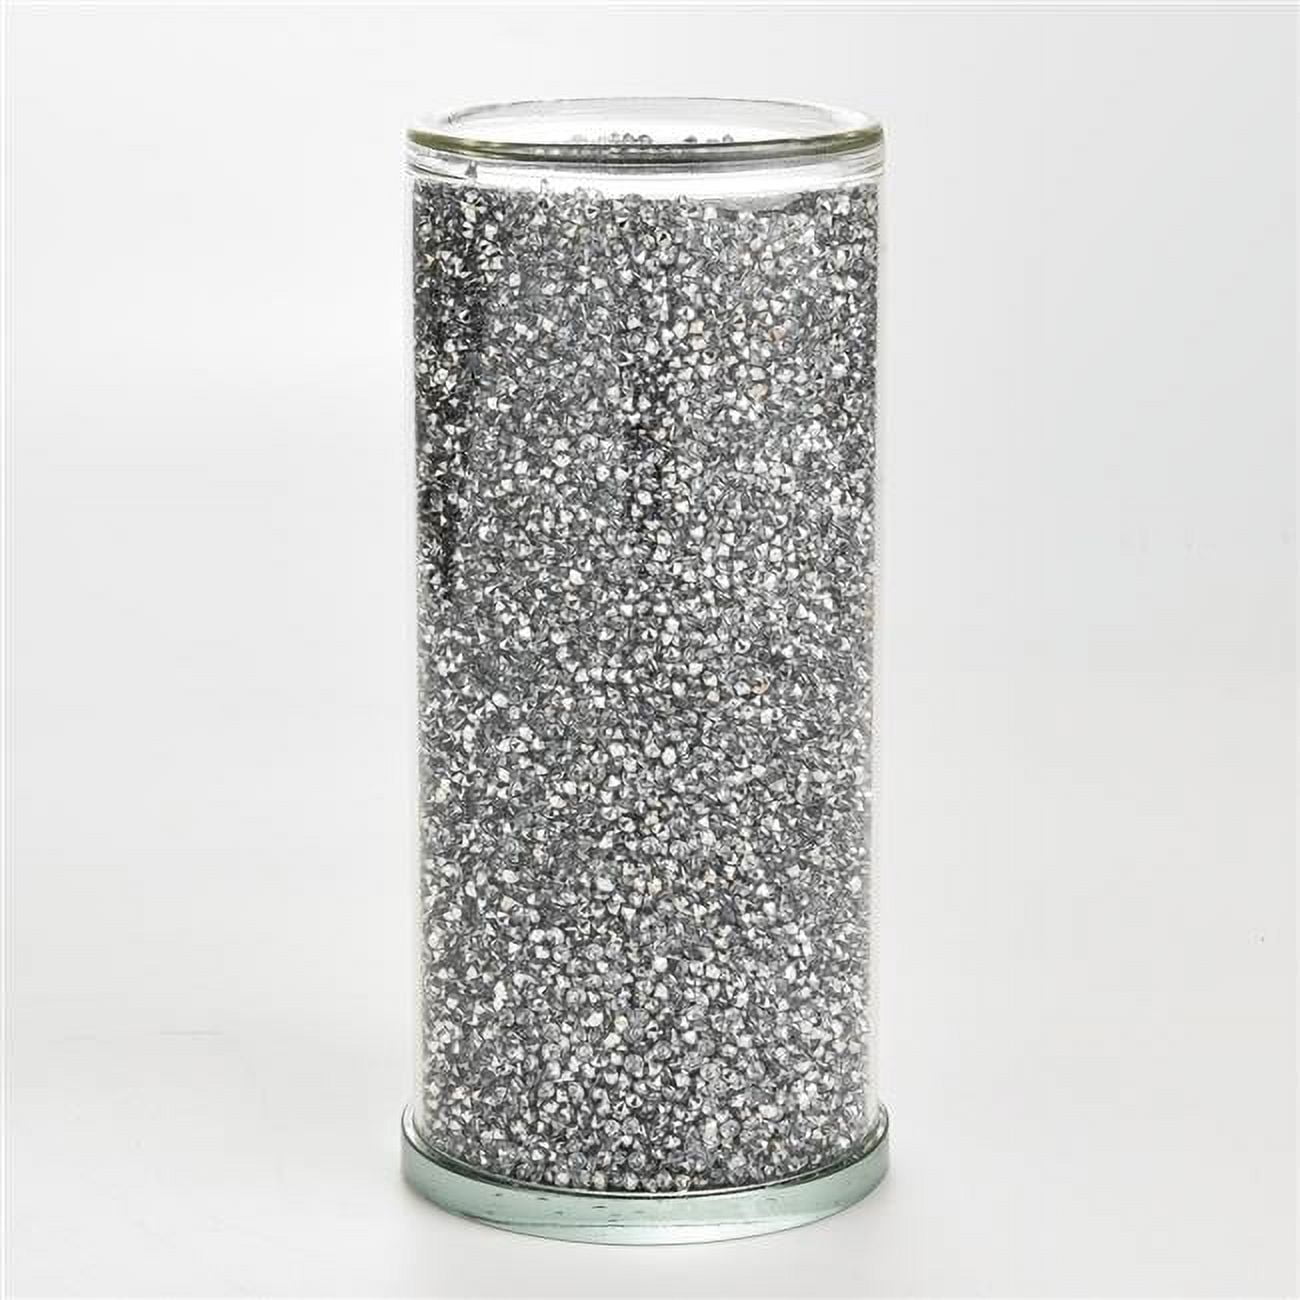 Picture of Schonfeld Collection 184713 4 x 4 x 9 in. Crystal Vase with Silver Diamond